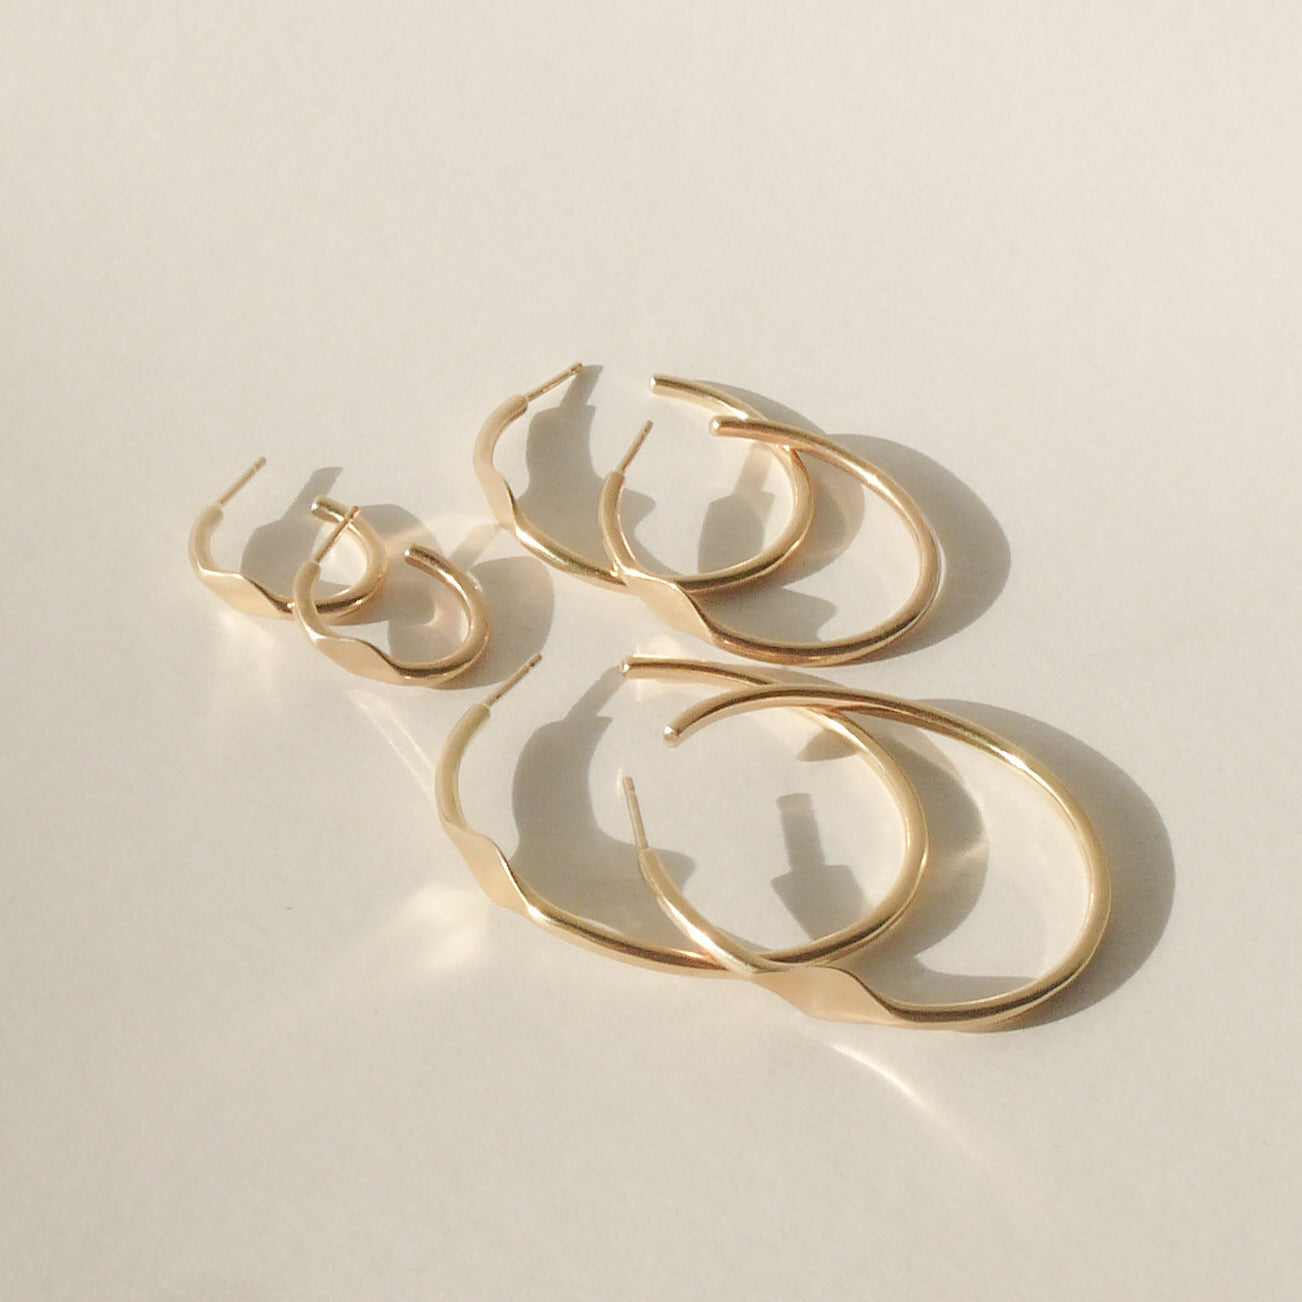 gold signet hoop earrings on white with shadow